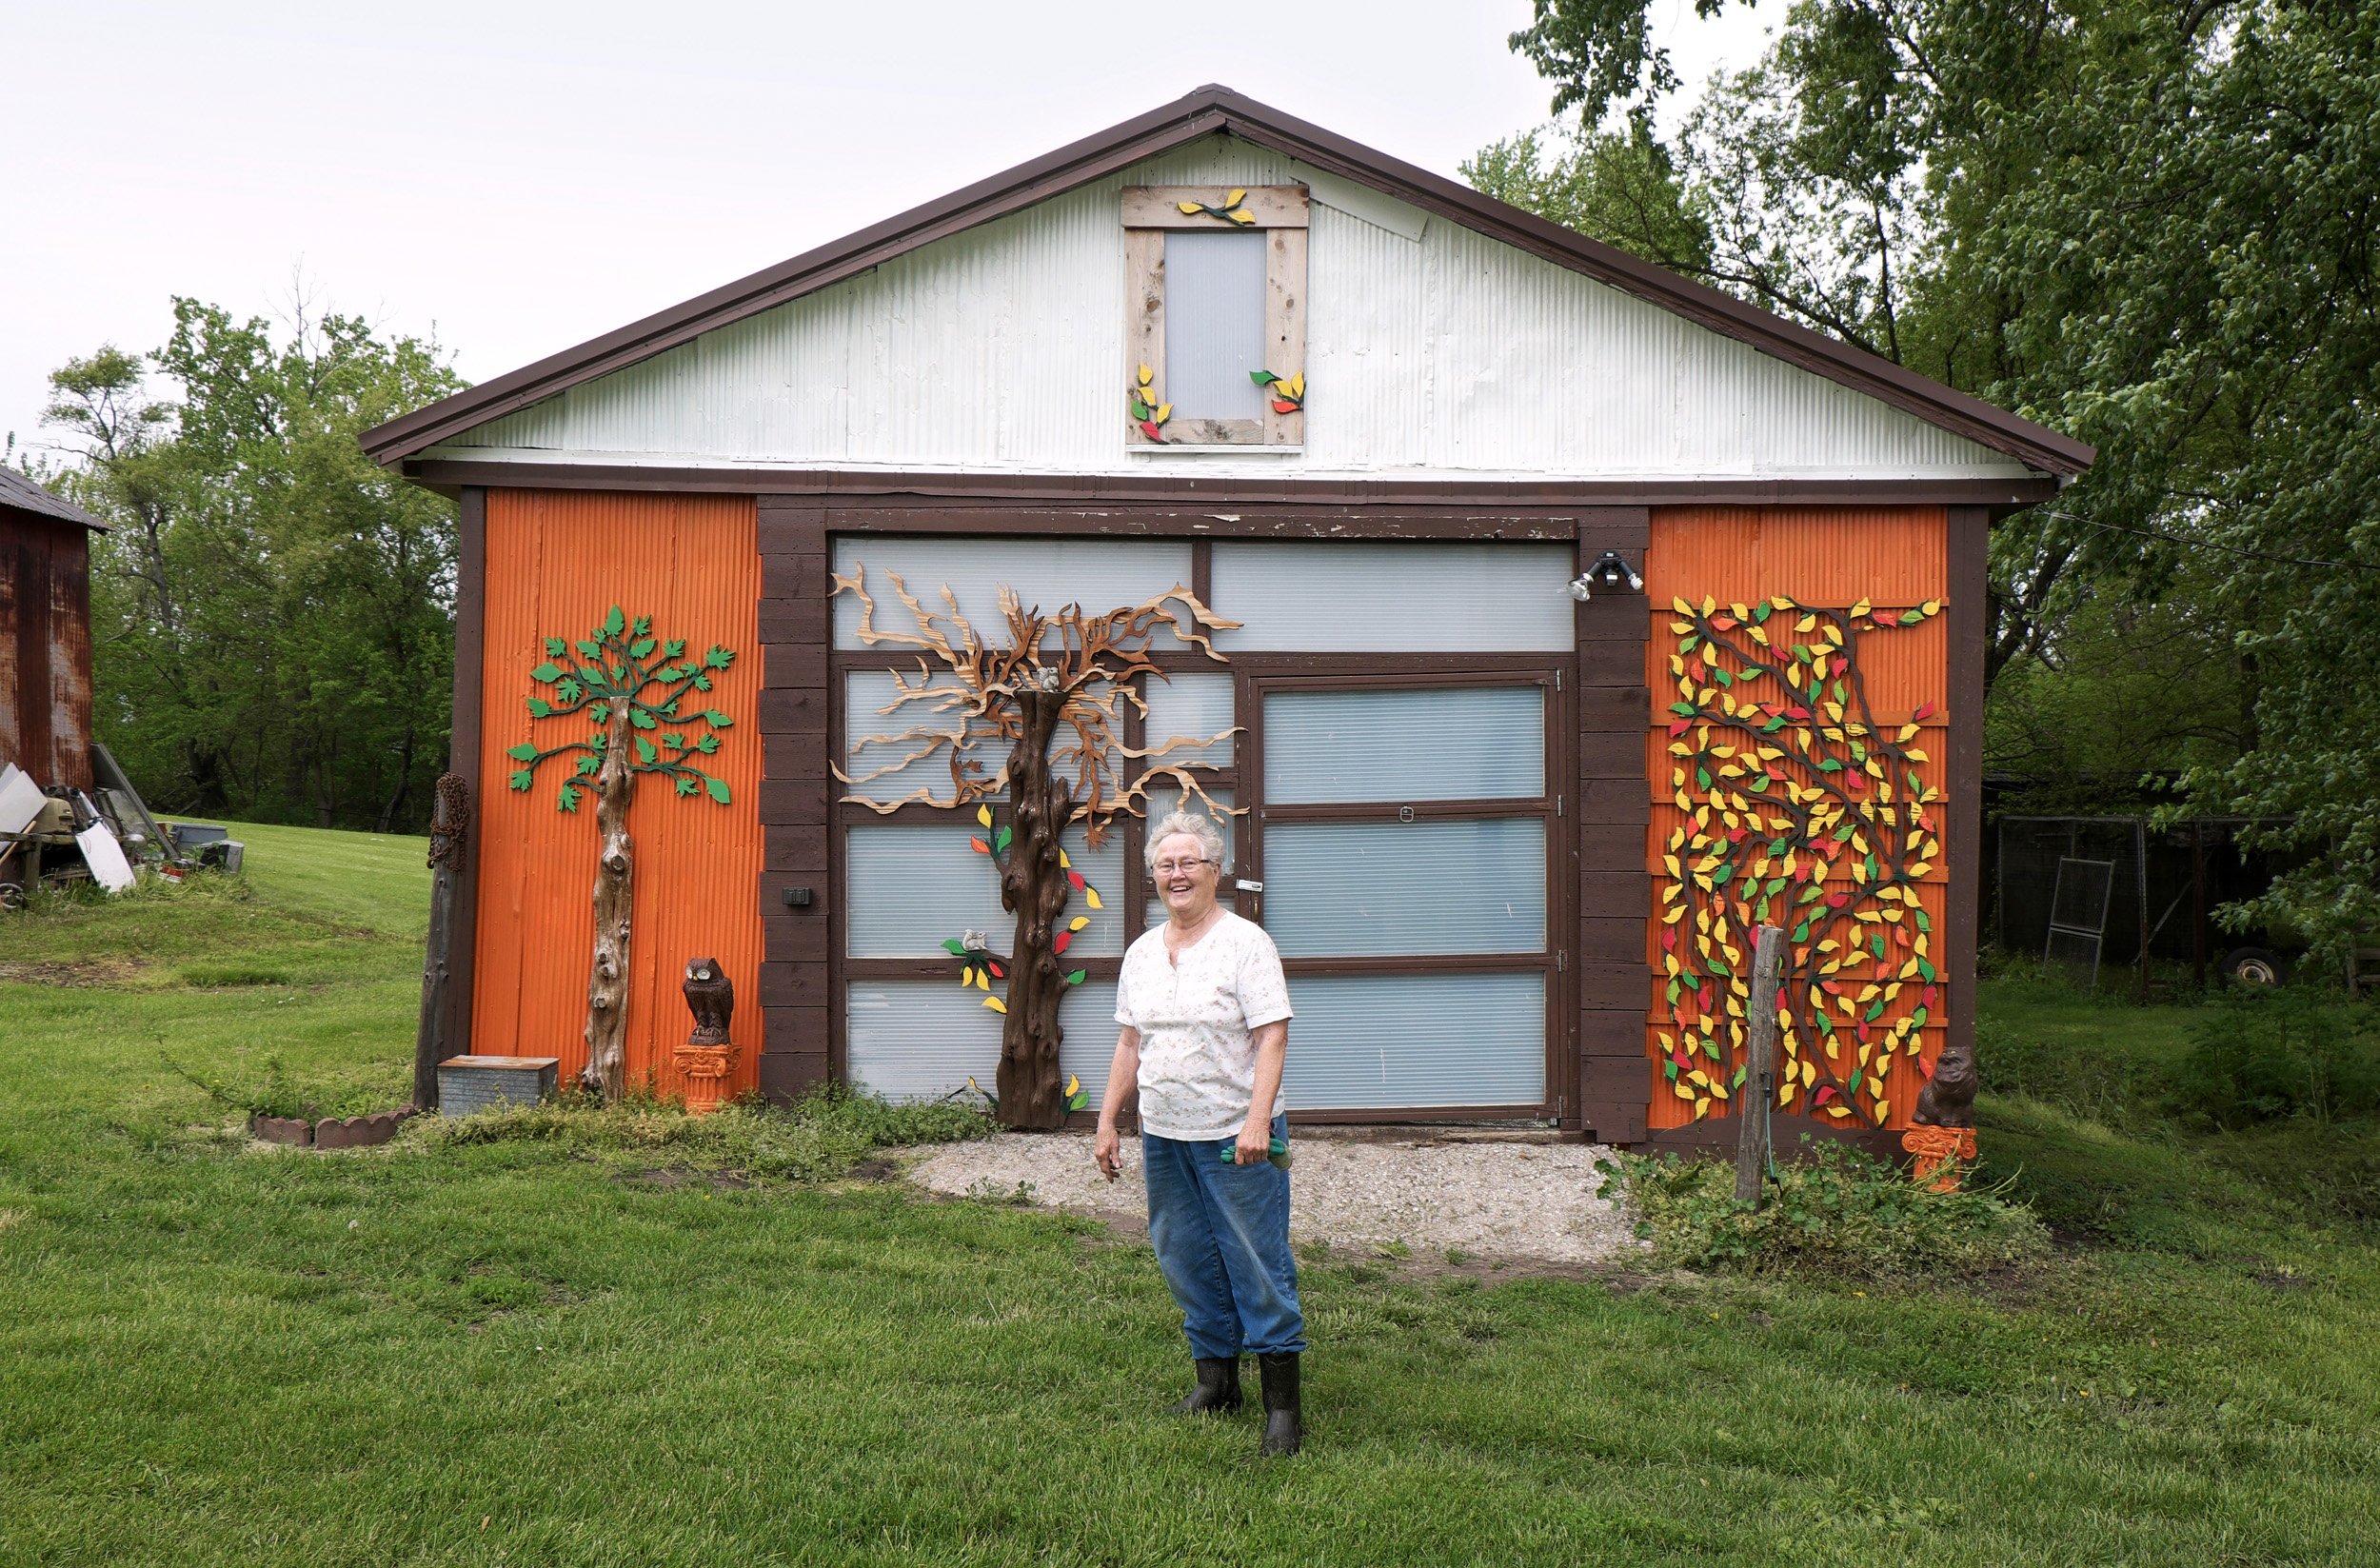  Woman standing by a garage decorated with artwork created by her son. Swan Lake, IL. May, 2016 